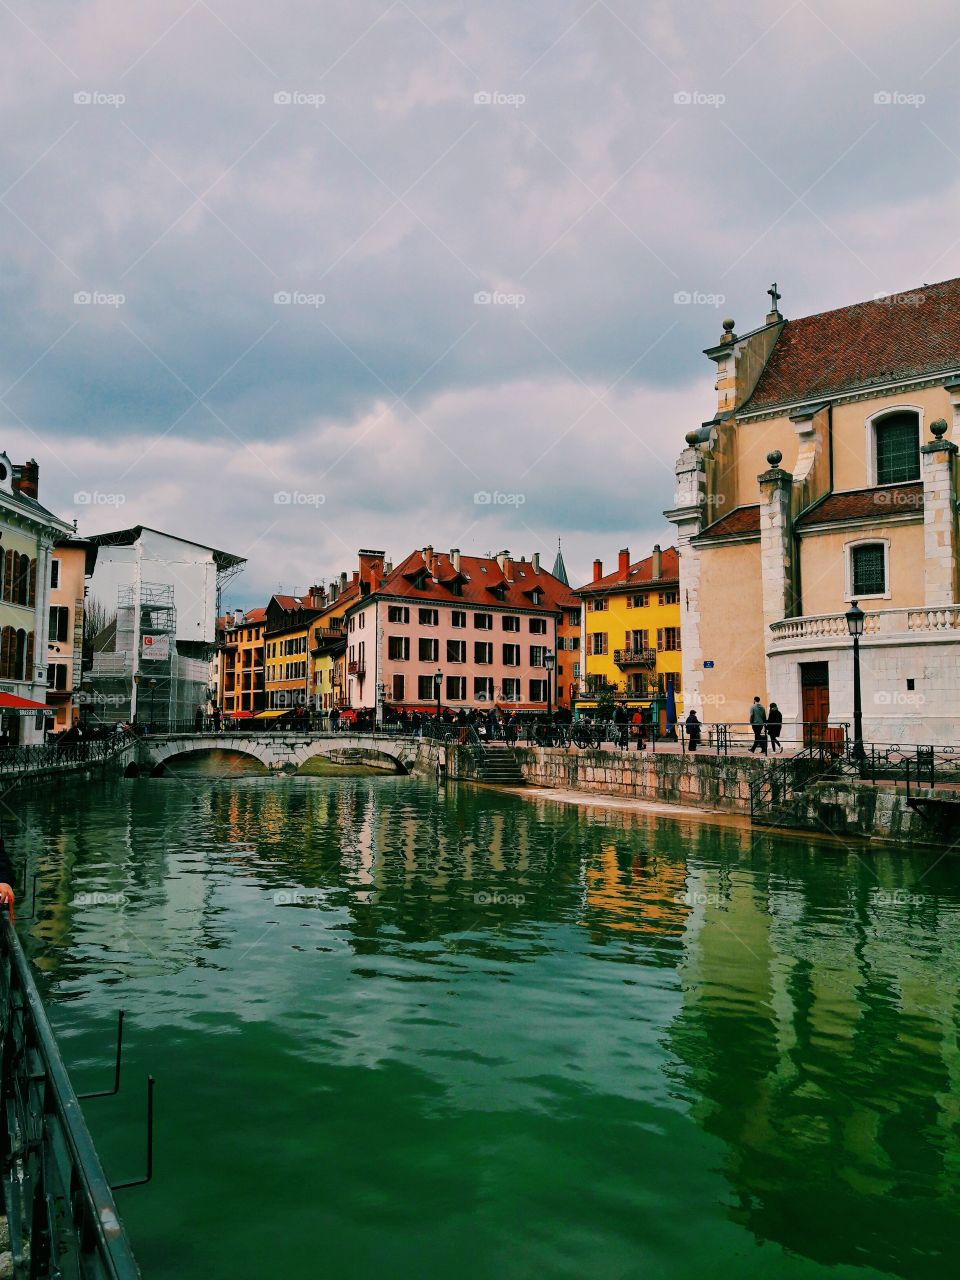 City of Annecy, France